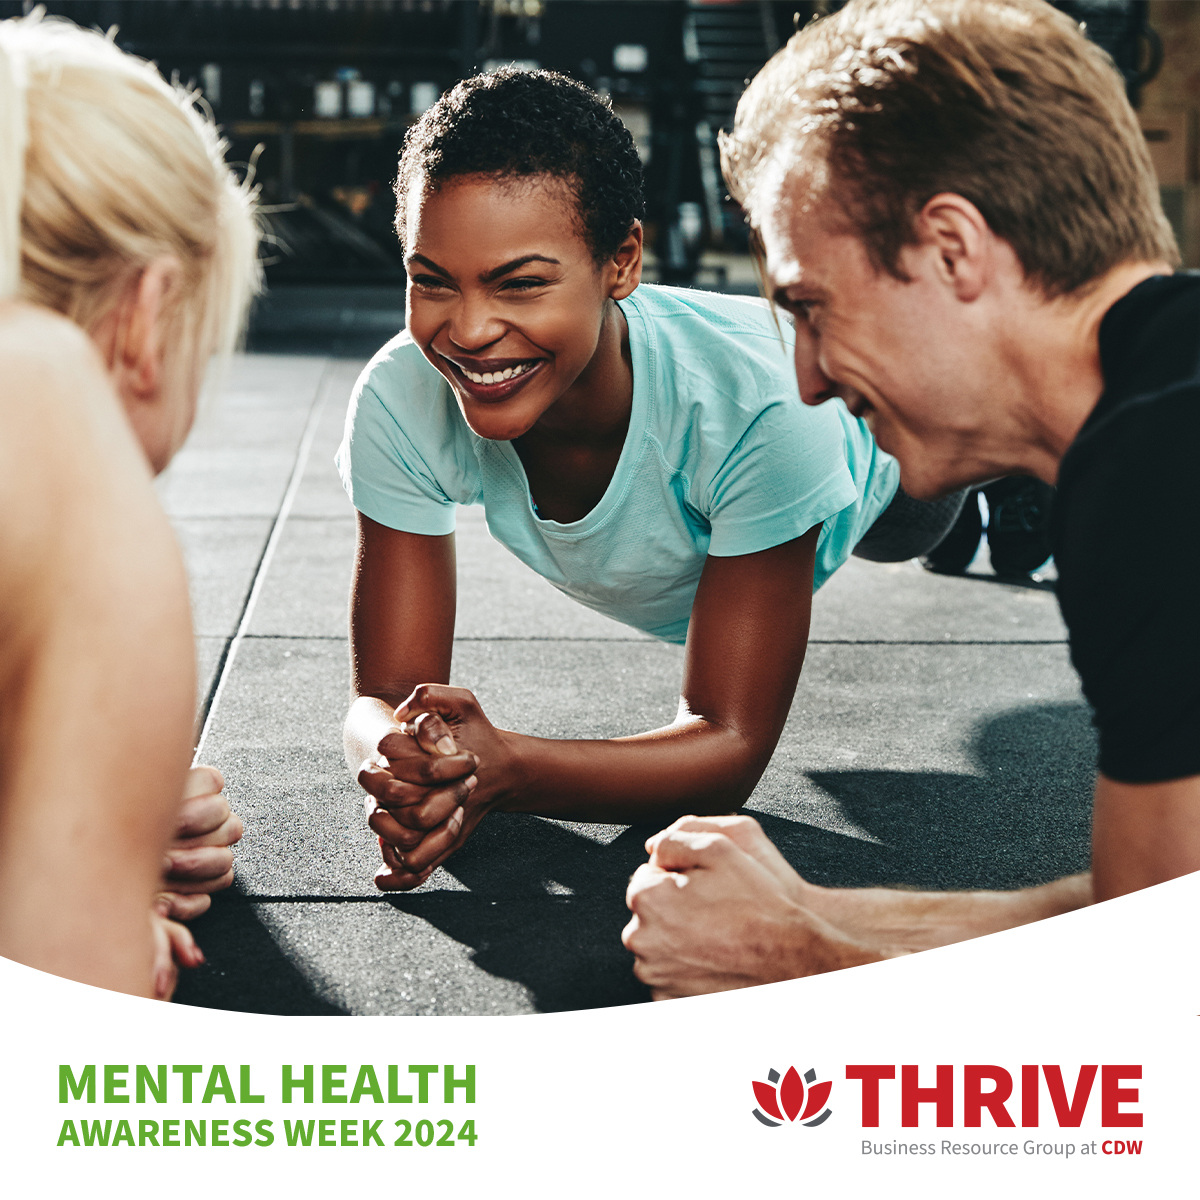 We're pleased to share CDW has recently signed the #MentalHealth at Work Commitment and proudly supports #MentalHealthAwarenessWeek, highlighting the profound link between mental and physical well-being. For more details about the commitment, please visit: hubs.ly/Q02wVXLZ0